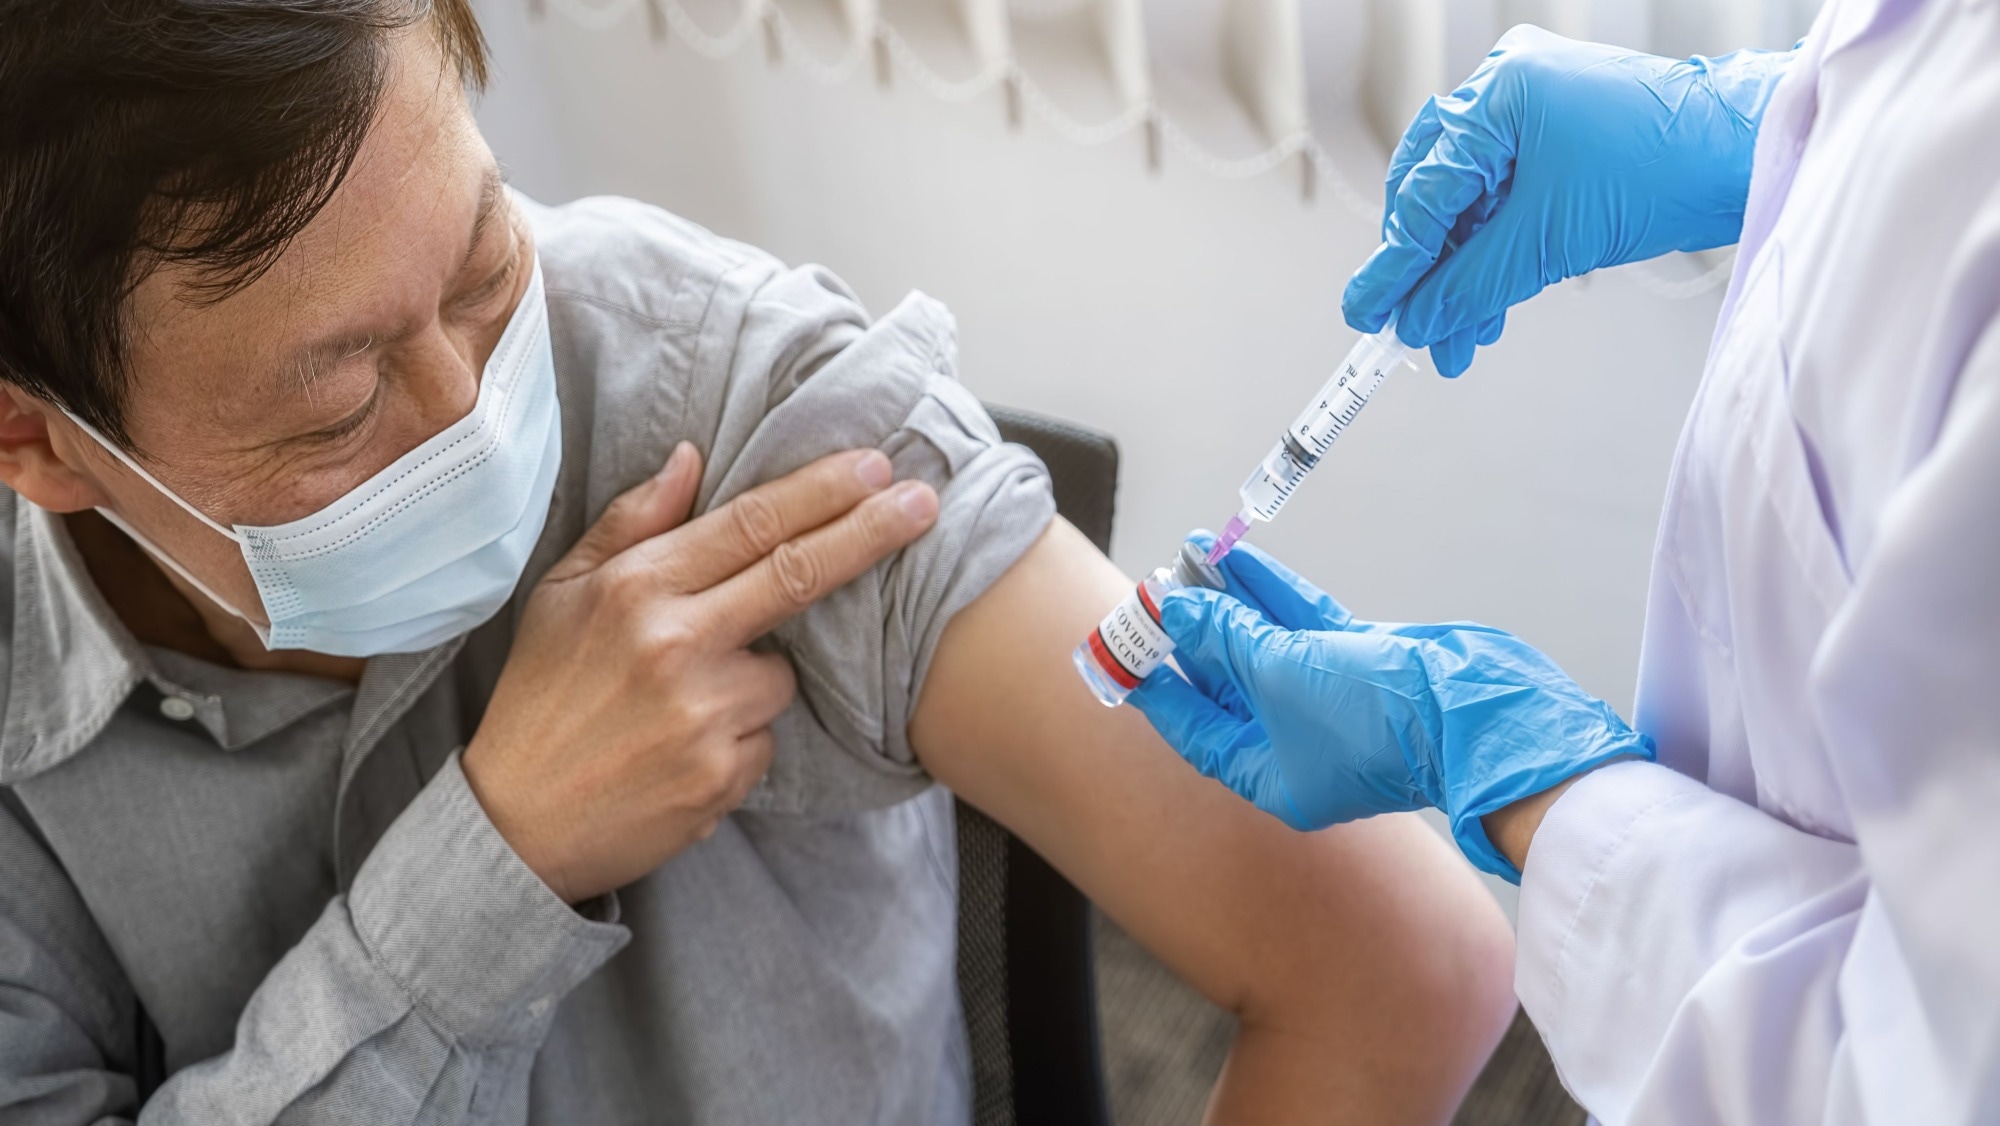 Study: Effectiveness of a fourth dose of mRNA COVID-19 vaccine against all-cause mortality in long-term care facility residents and in the oldest old: A nationwide, retrospective cohort study in Sweden. Image Credit: PIC SNIPE/Shutterstock